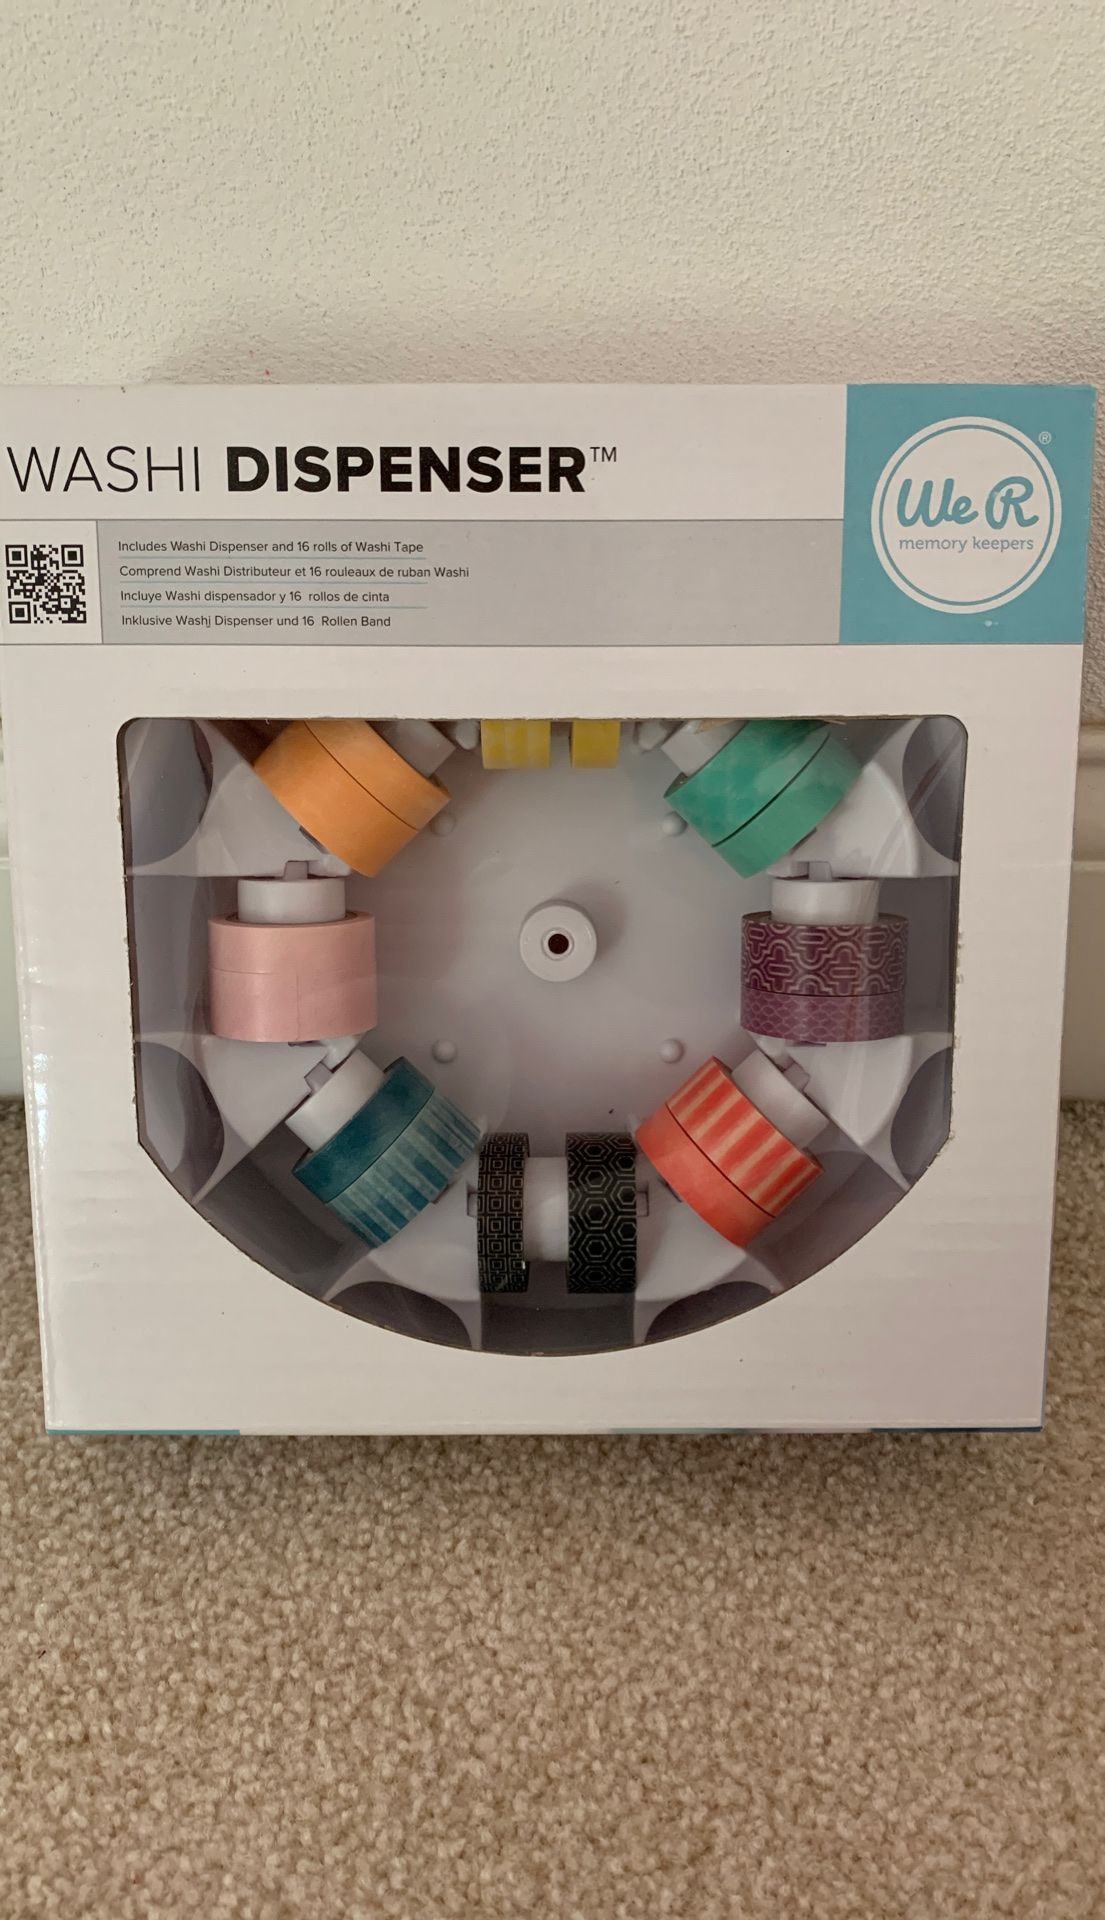 Washi tape and dispenser. Brand new in box